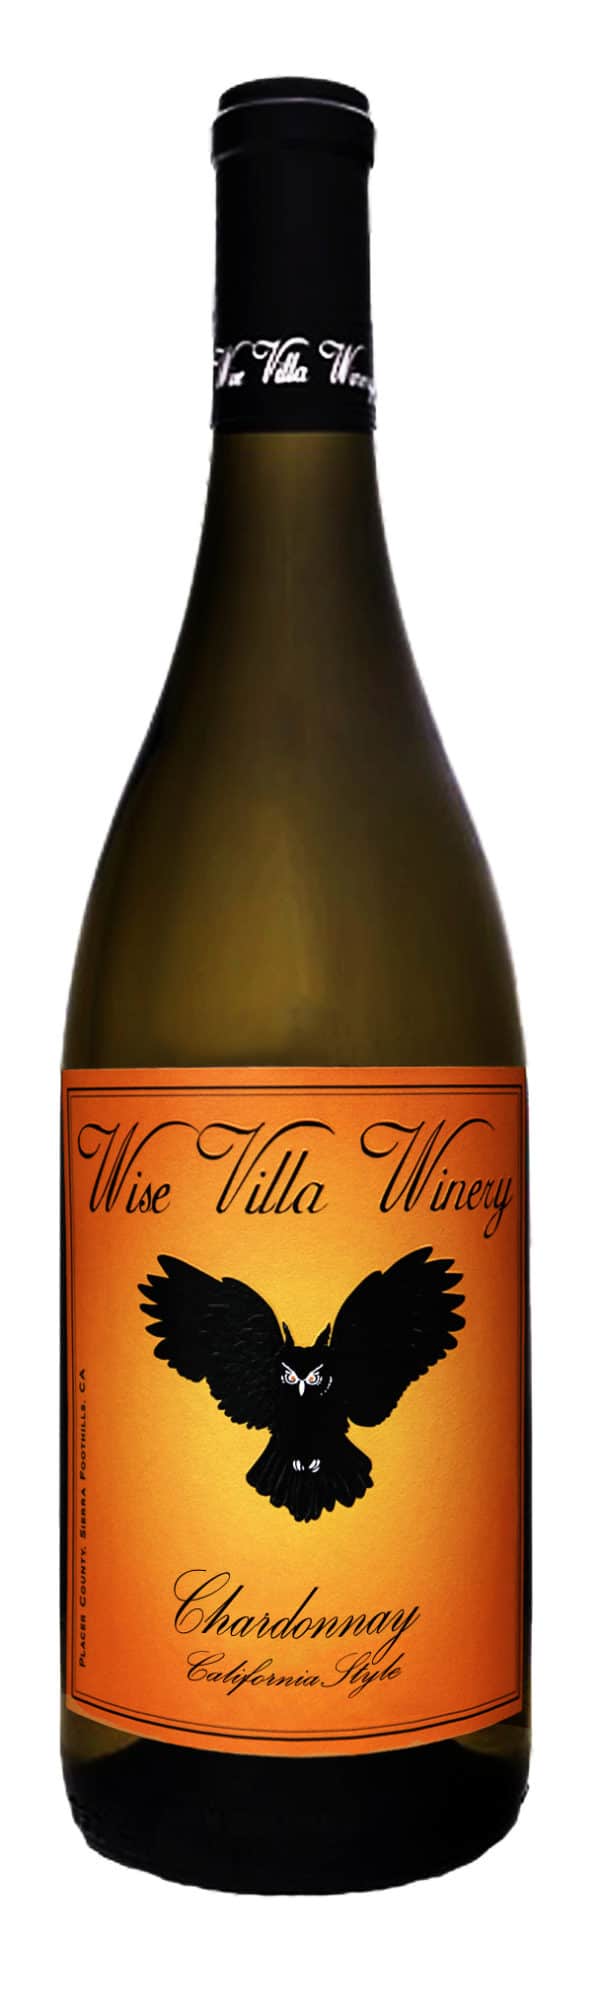 Product Image for 2020 California Style Chardonnay